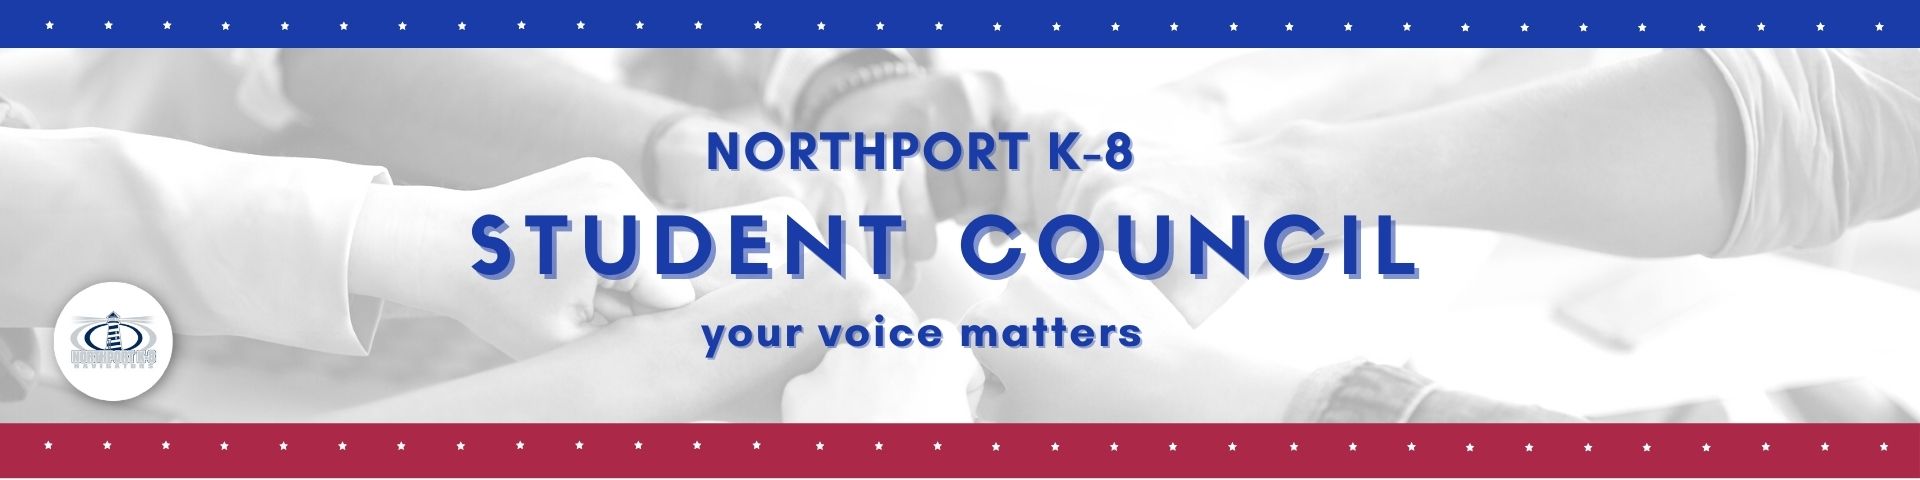 Student Council – Northport K-8